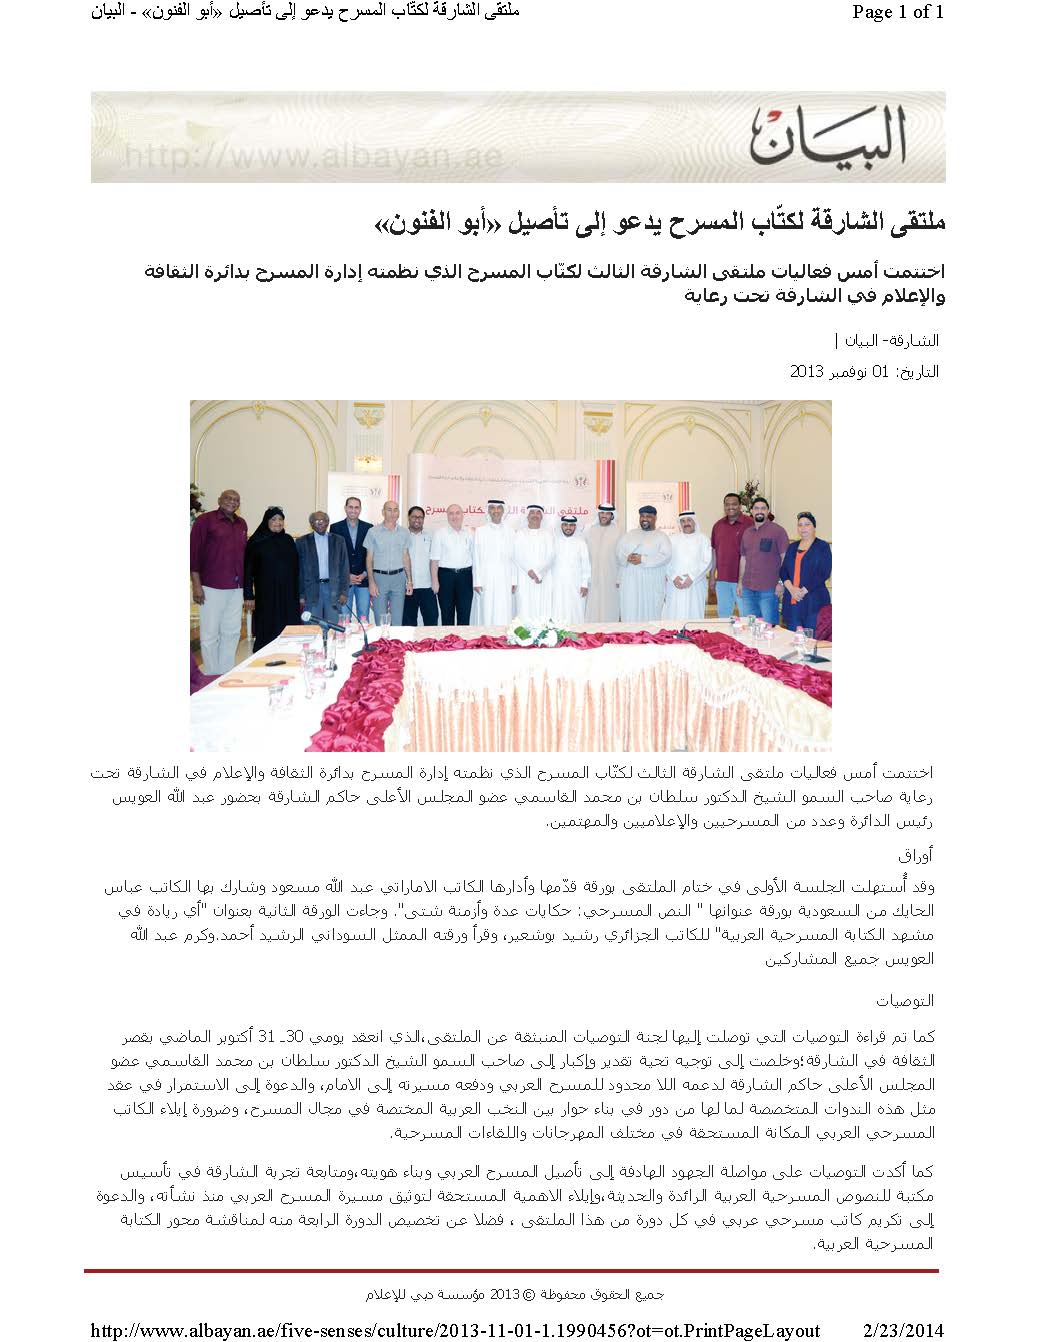 Al-Byan newspaper, article about Sharjah third convention of playwrights.